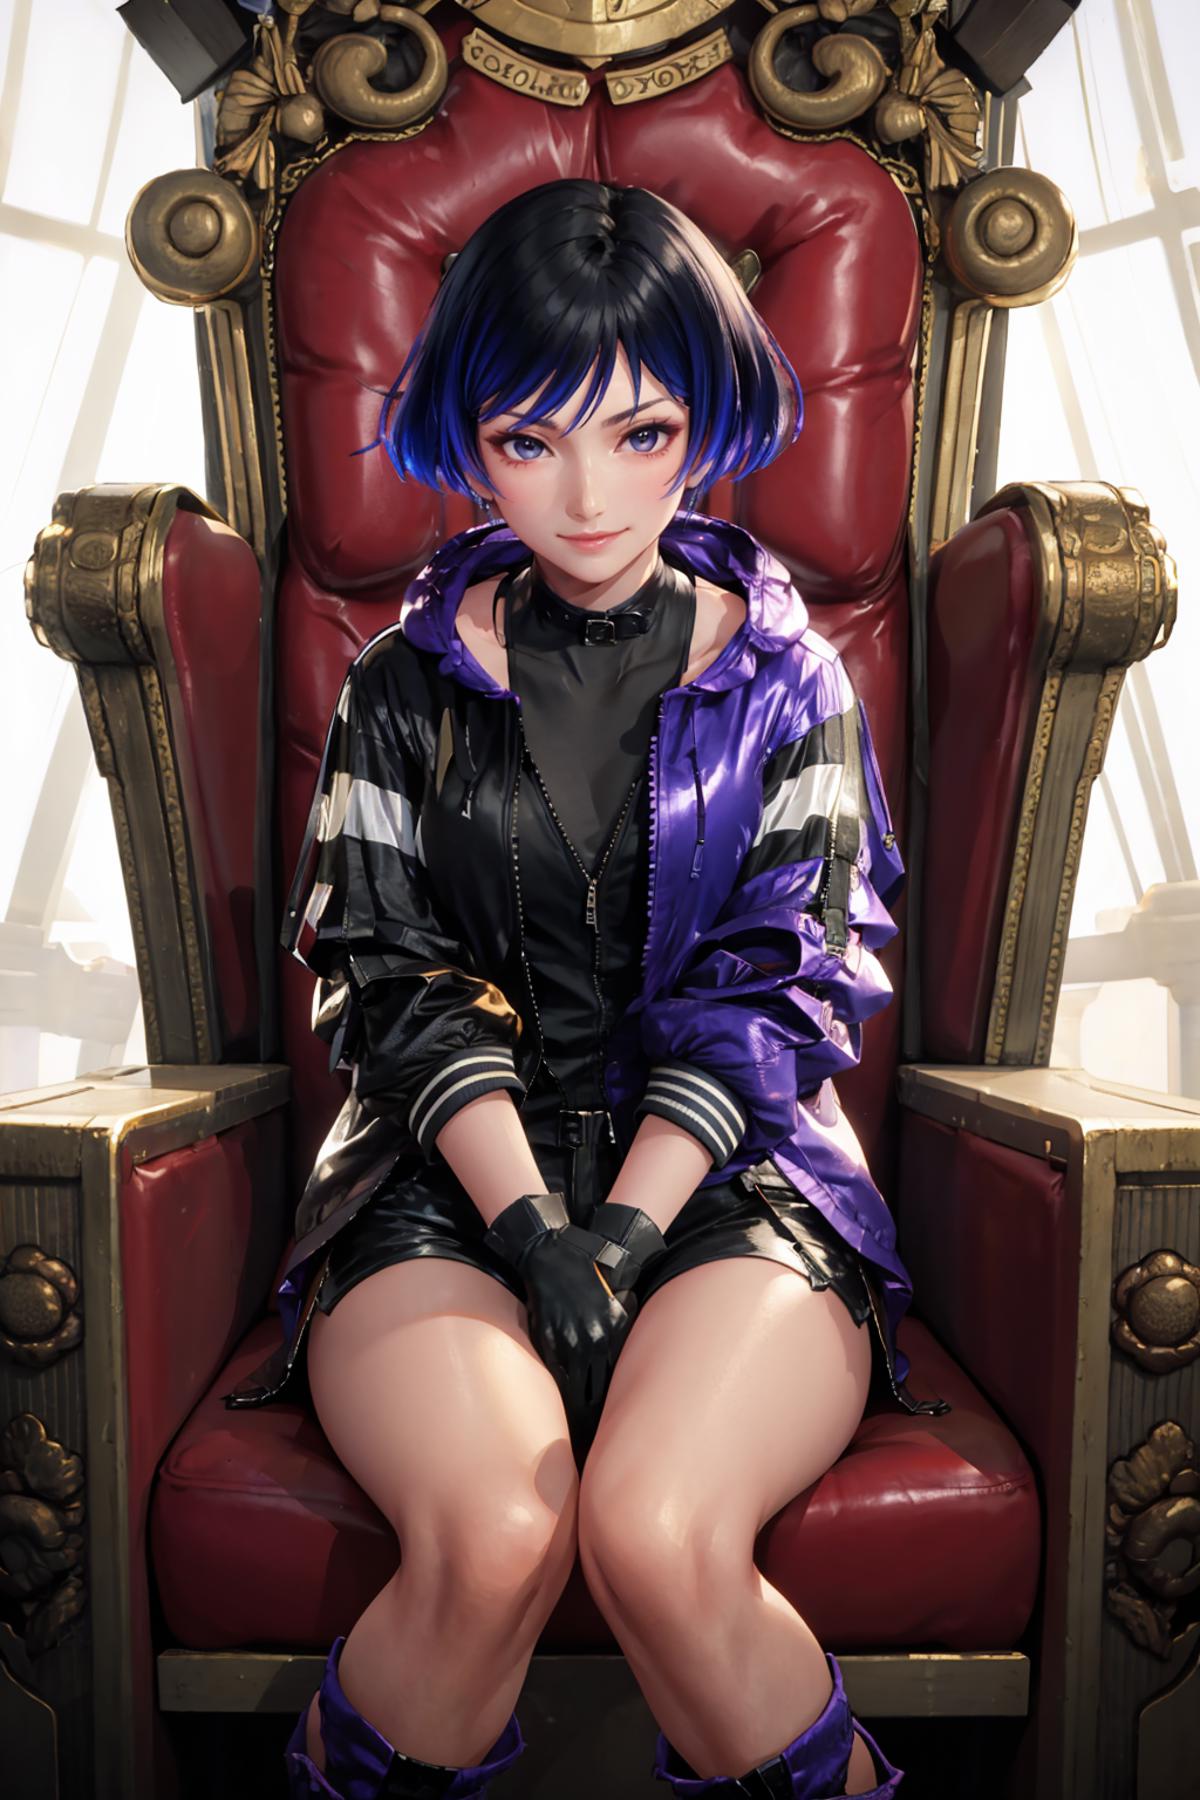 Anime character wearing a purple jacket and black leather shorts sitting in a red chair.